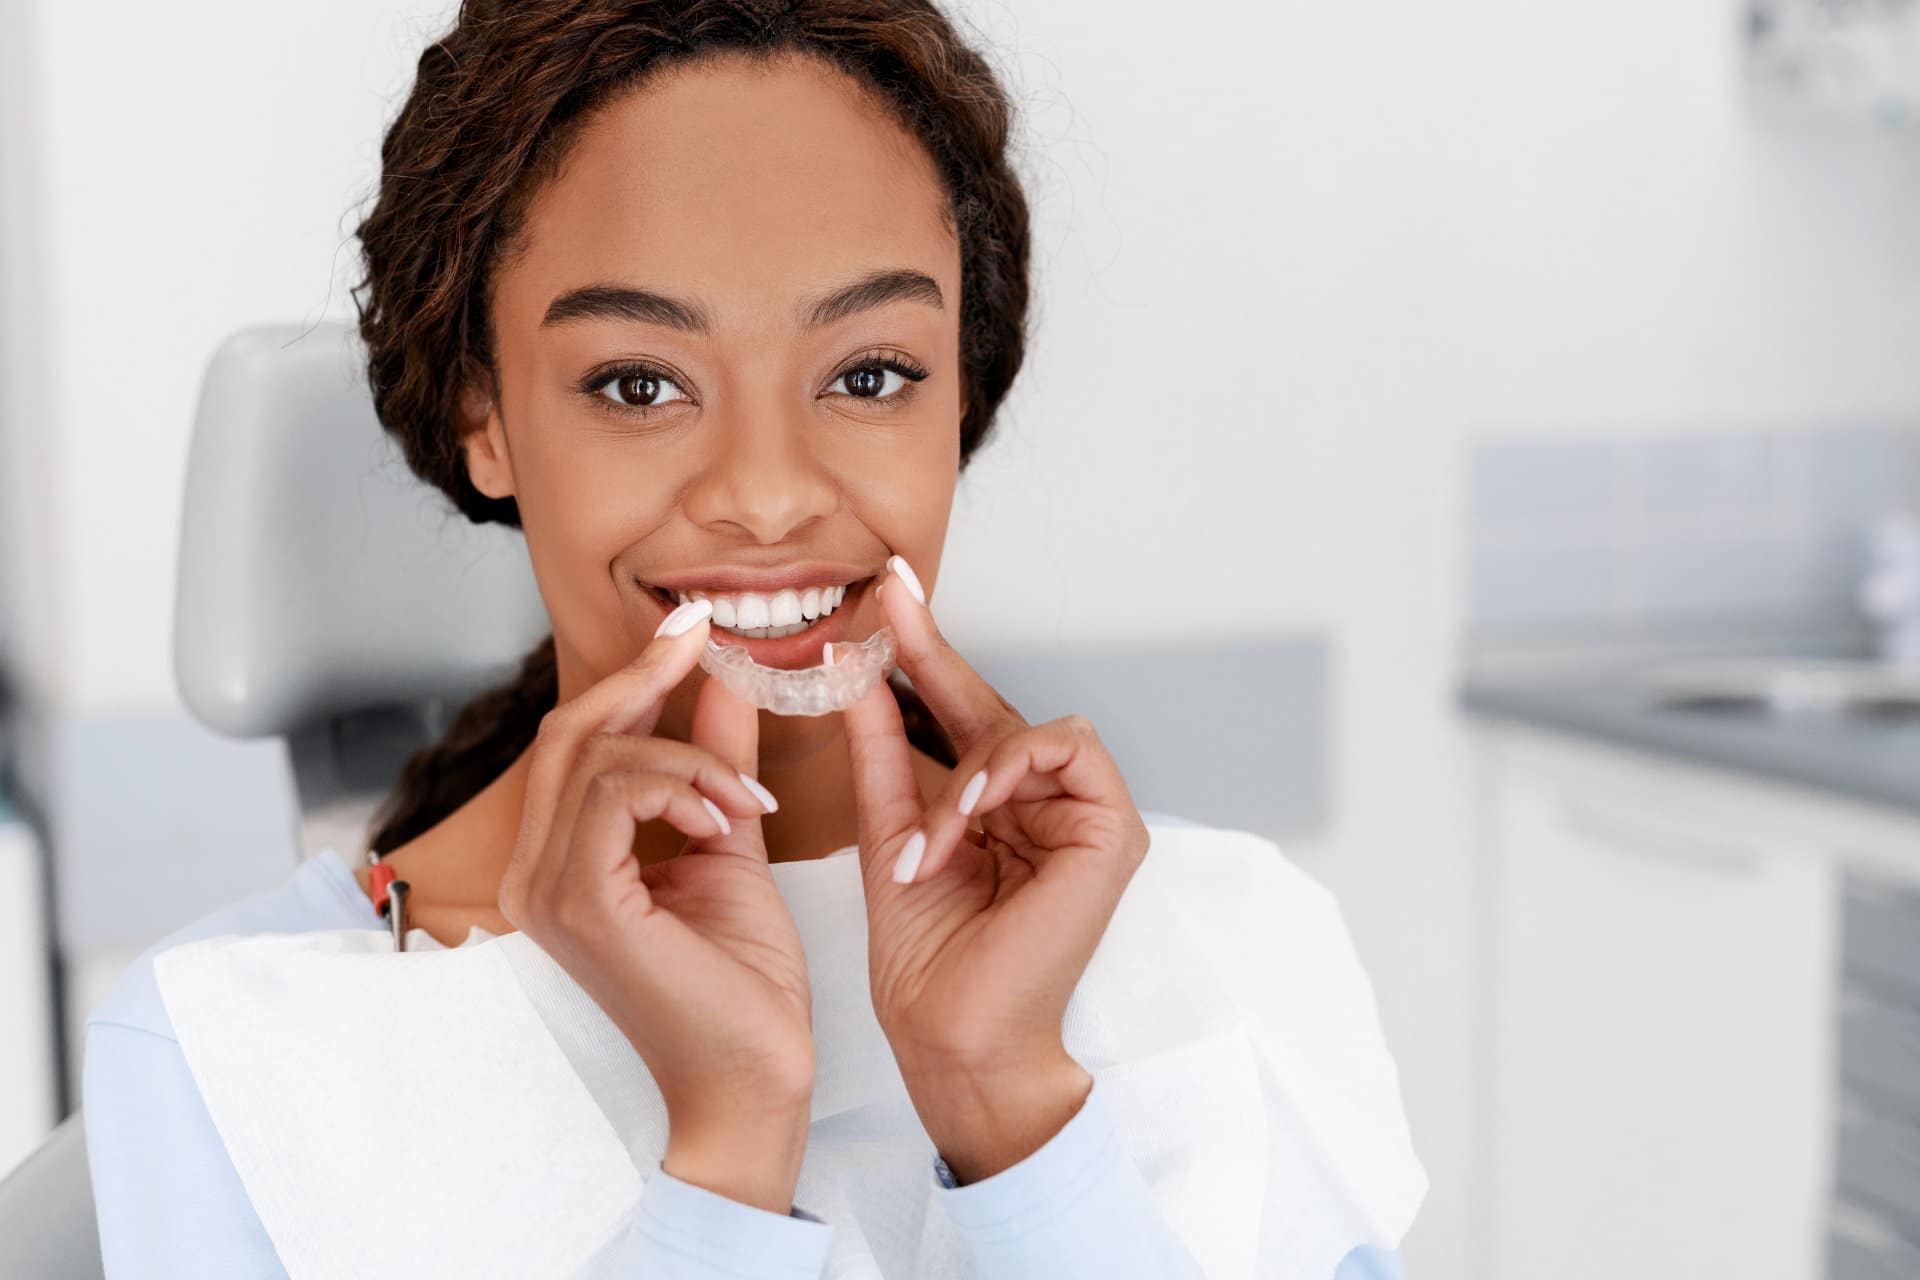 Get your dream smile with our comfortable, confidential Invisalign treatment, tailored to suit your unique needs.